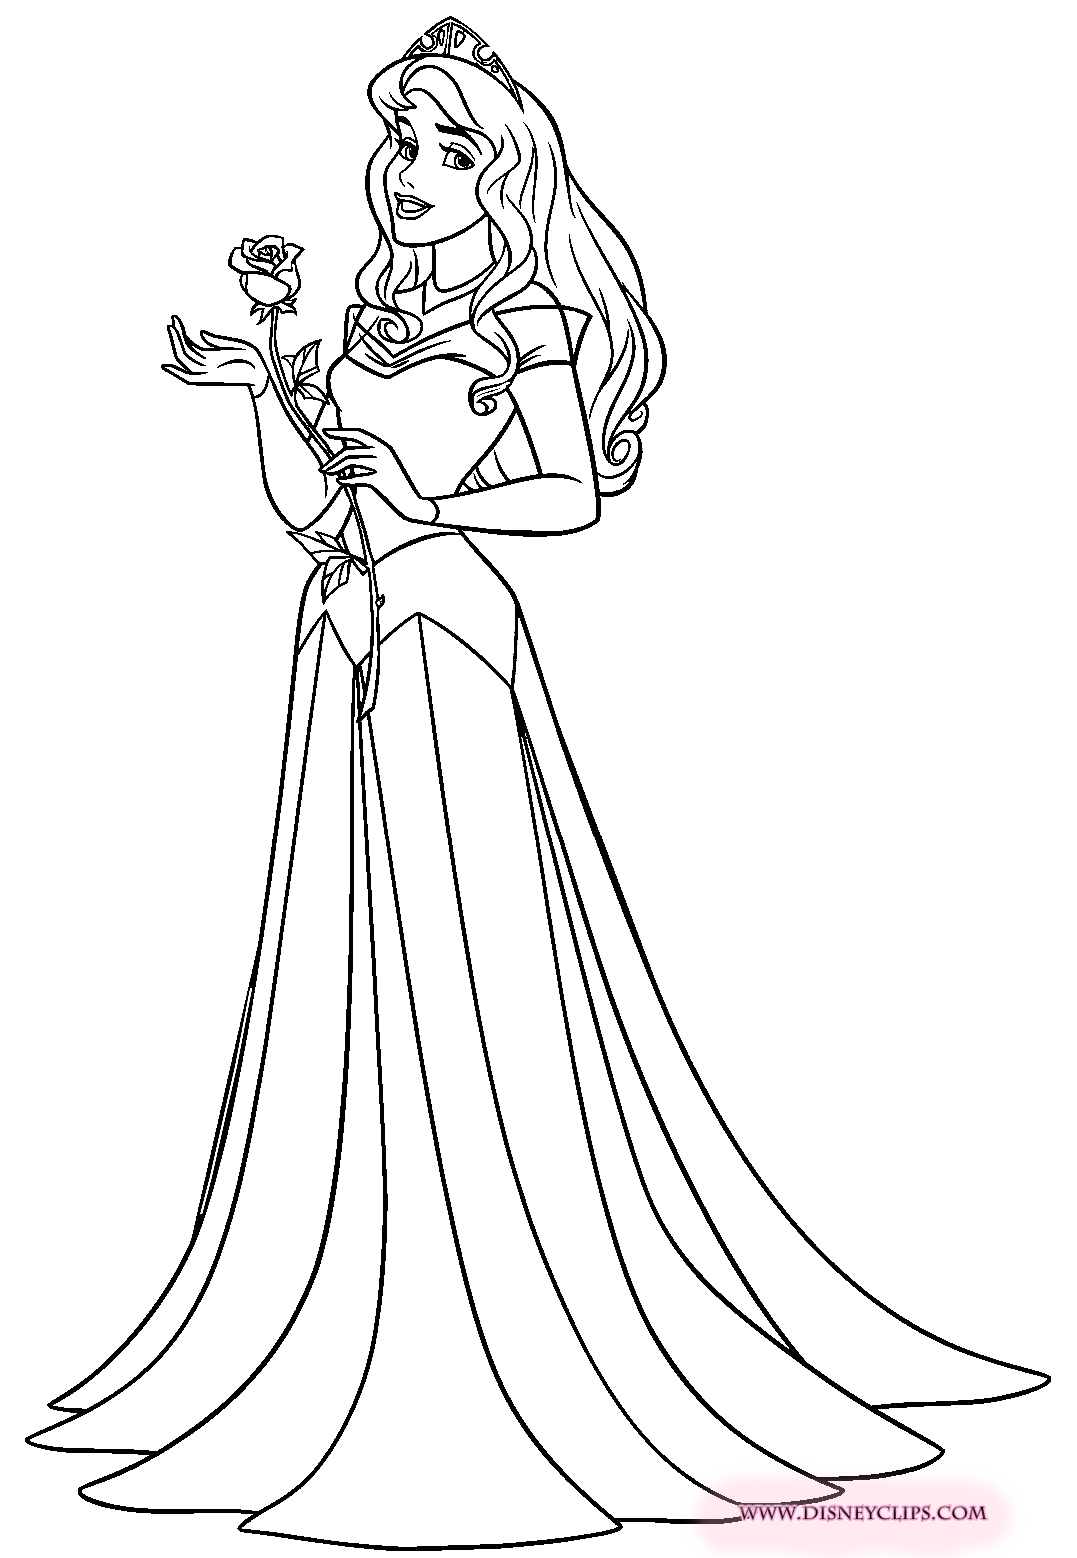 Aurora Face Coloring Pages - Coloring Pages For All Ages